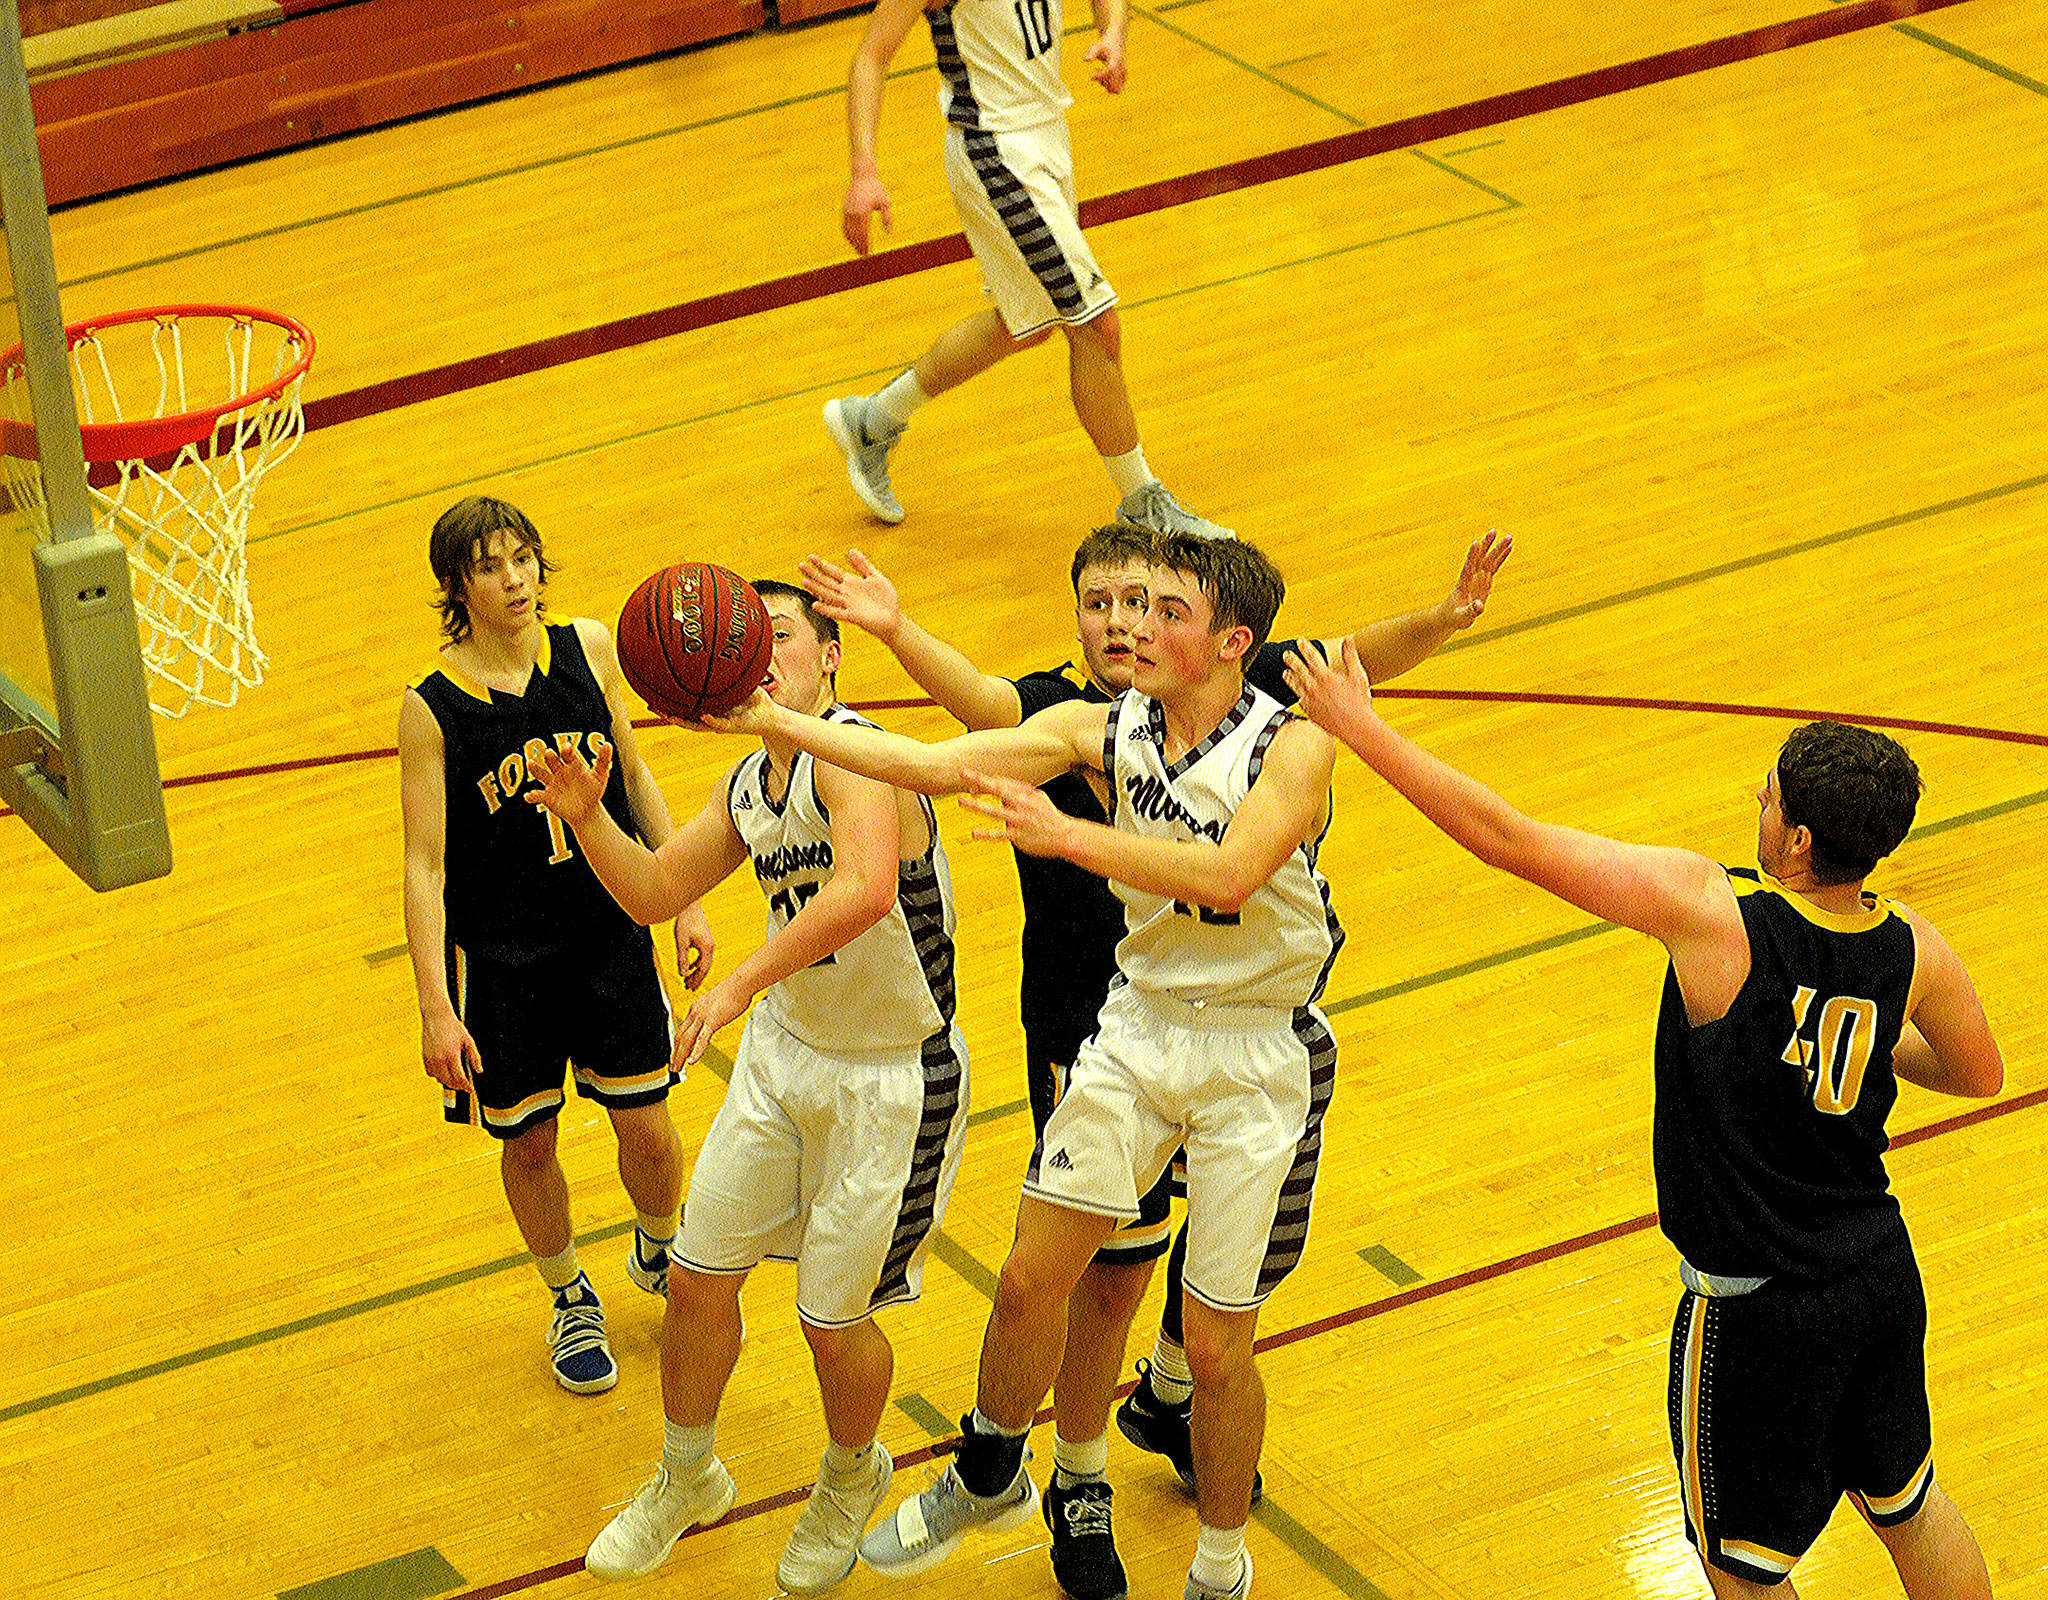 Sam Winter drives to the rim in a district tournament game against Forks.